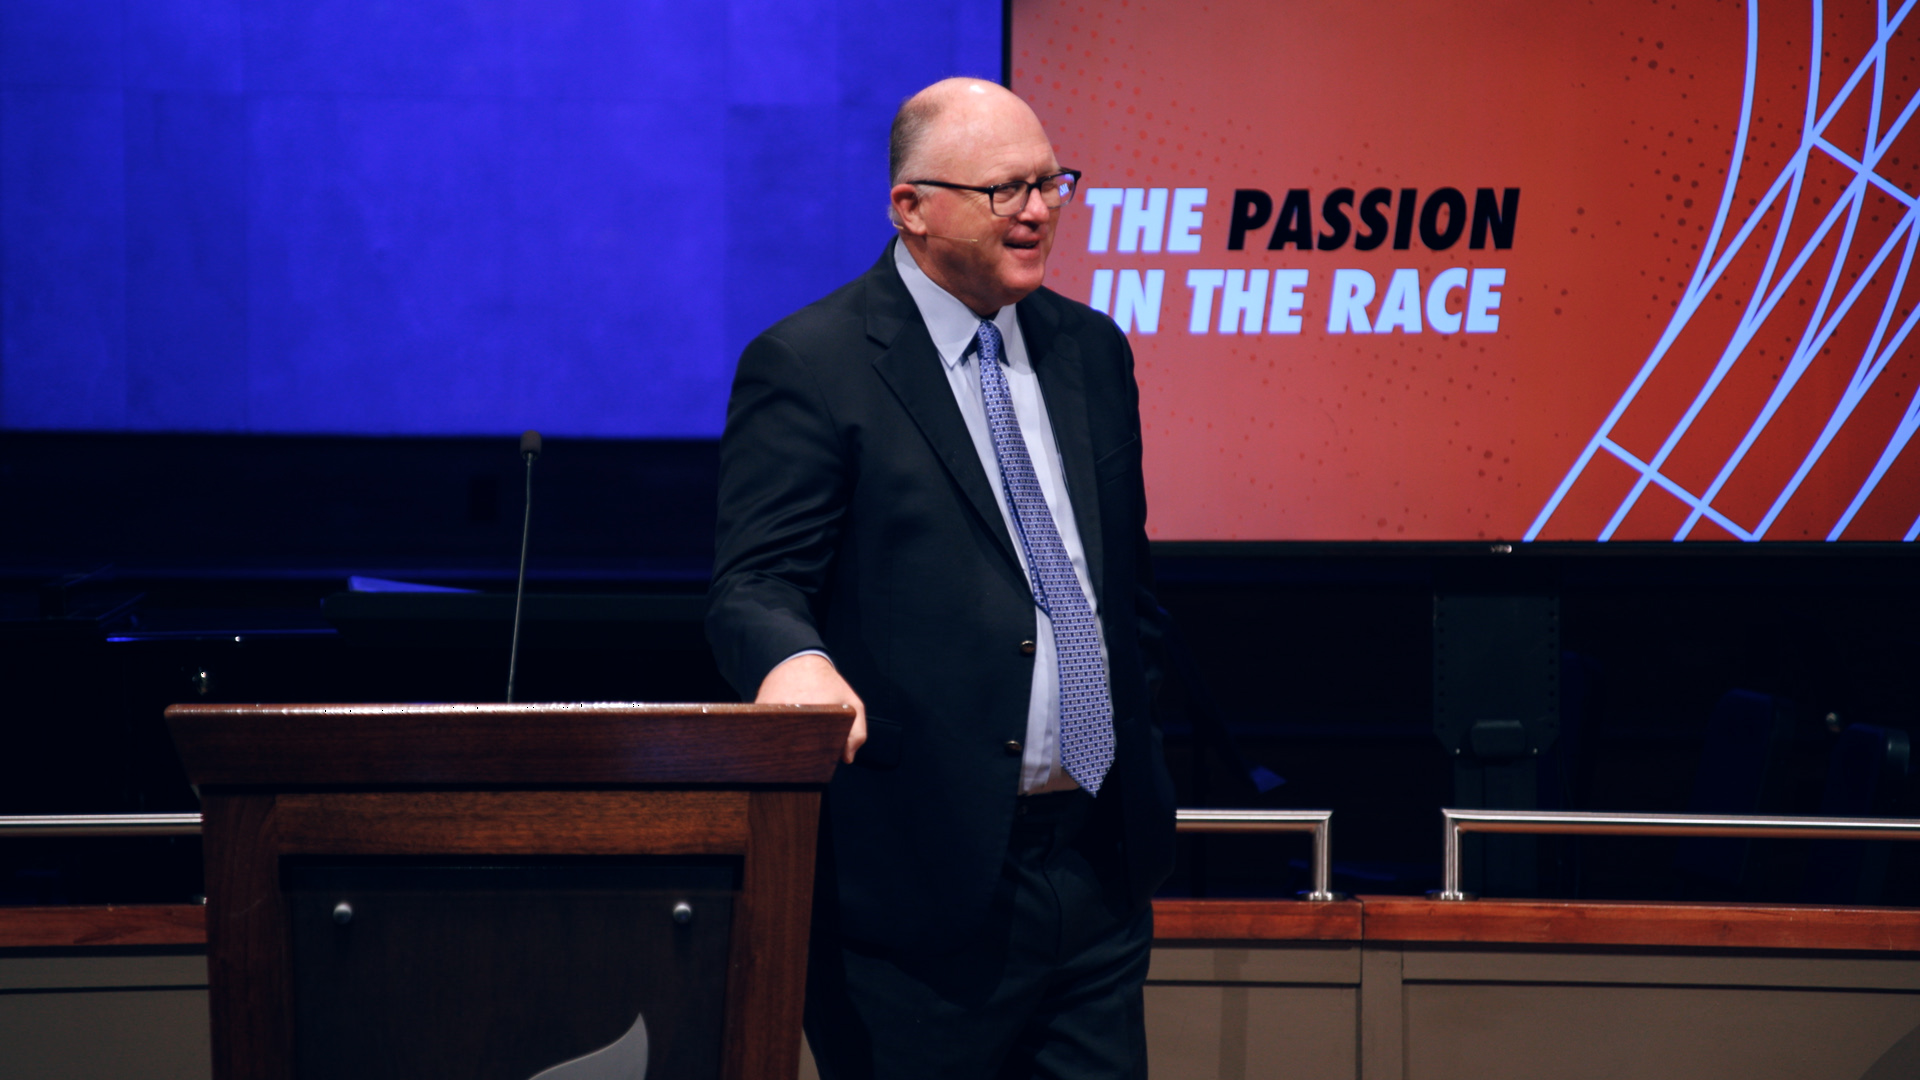 Pastor Paul Chappell: The Race Before Us